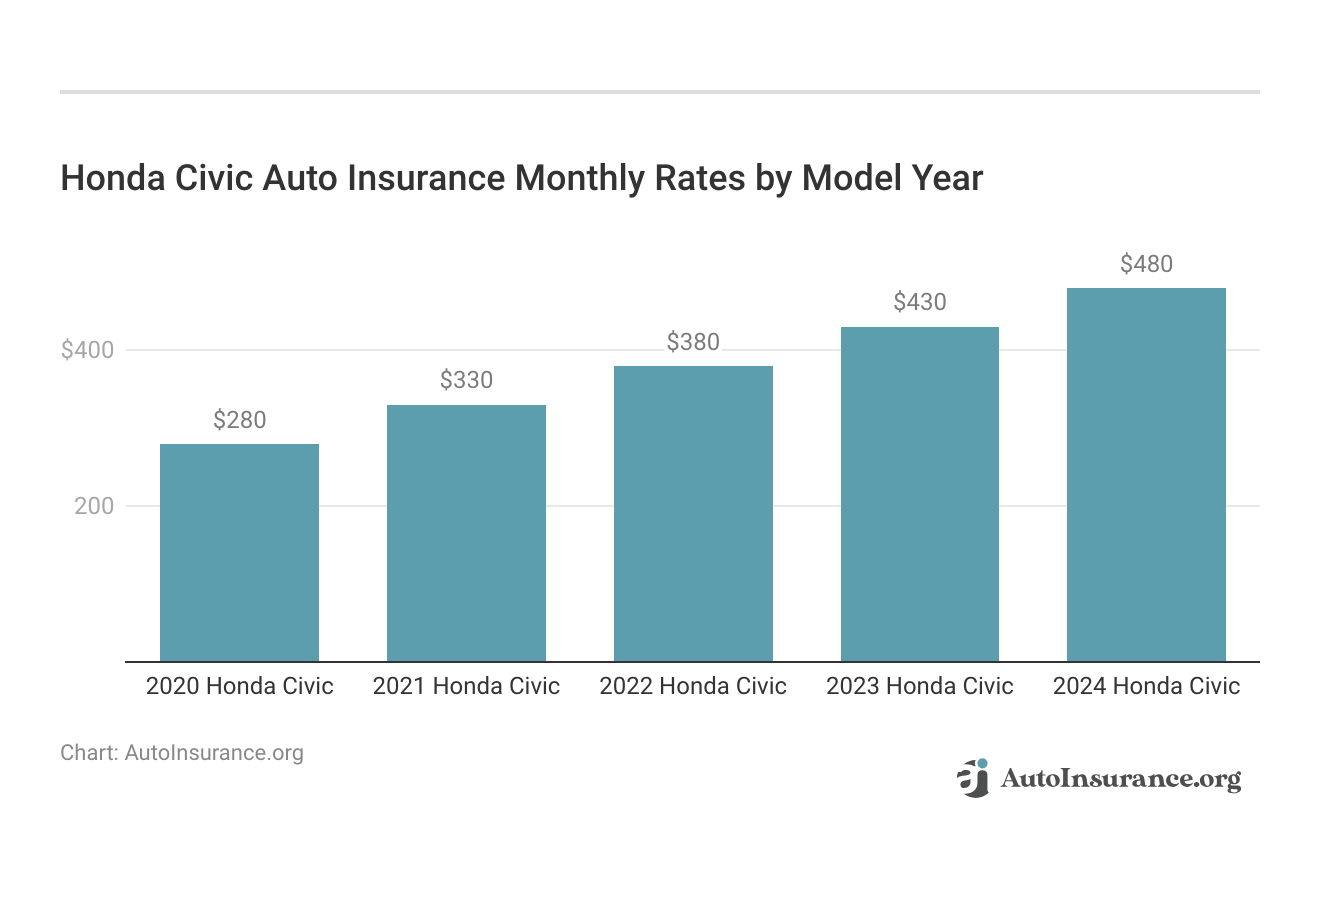 <h3>Honda Civic Auto Insurance Monthly Rates by Model Year</h3>